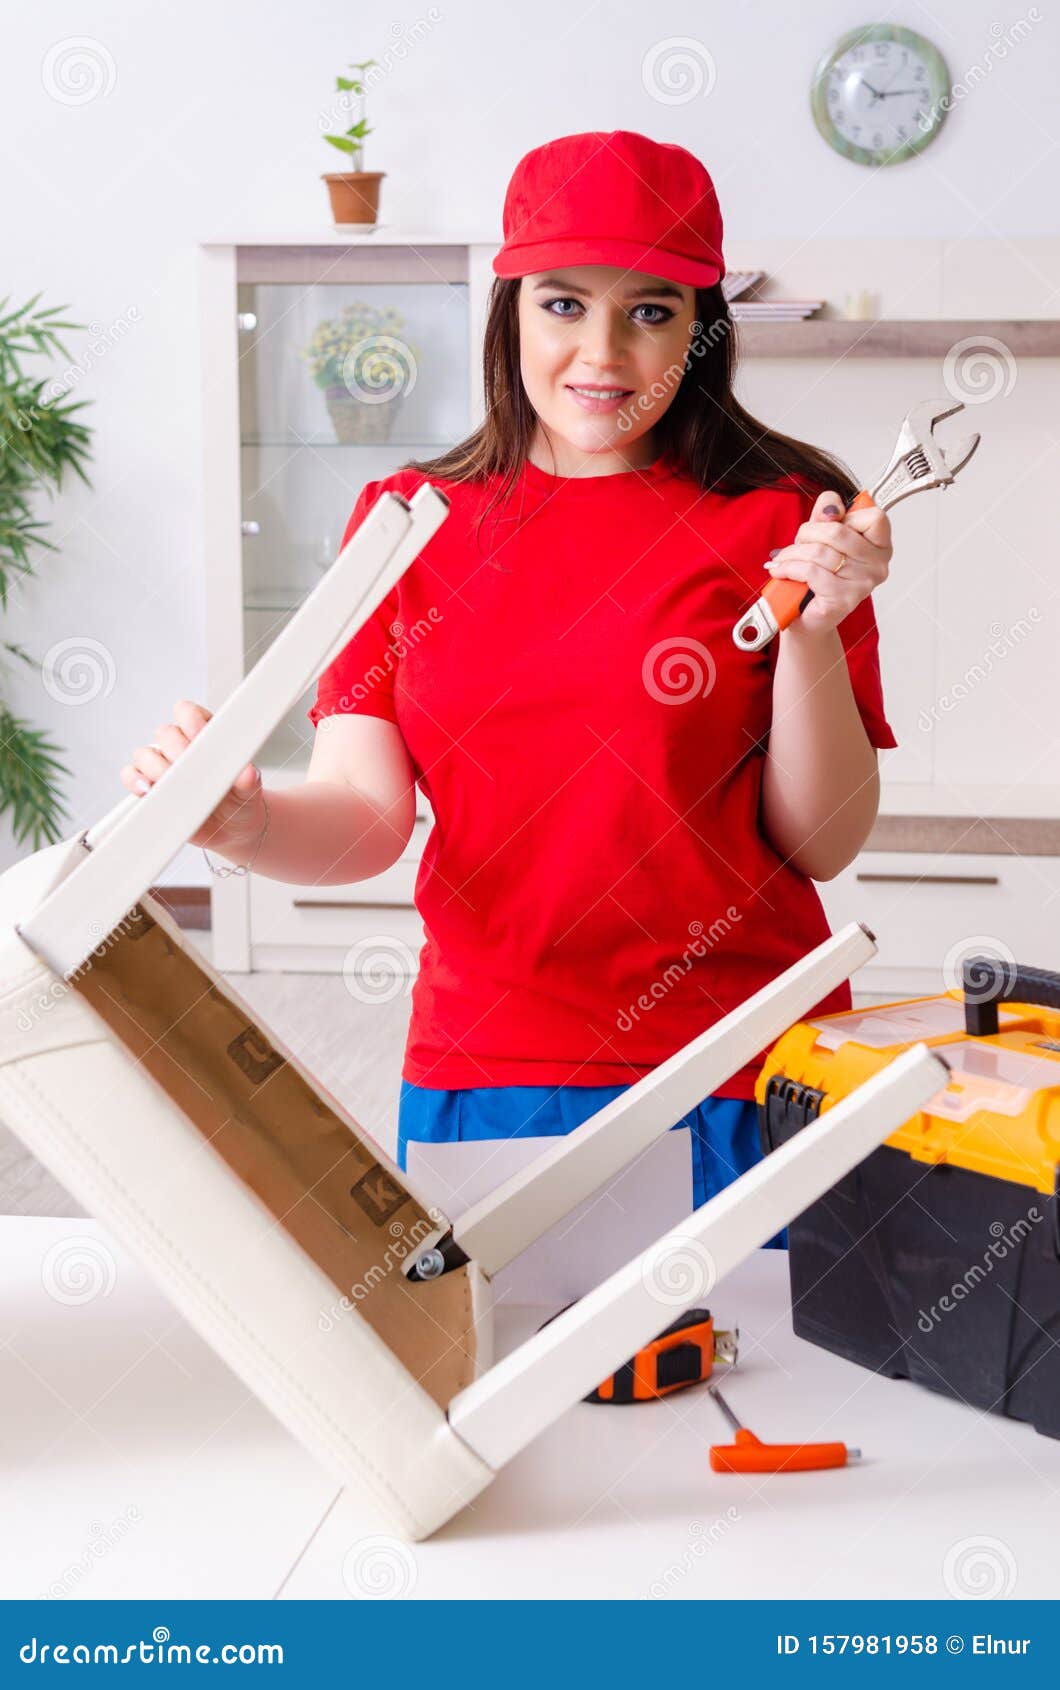 Young Woman Repairing Chair at Home Stock Photo - Image of fixing ...